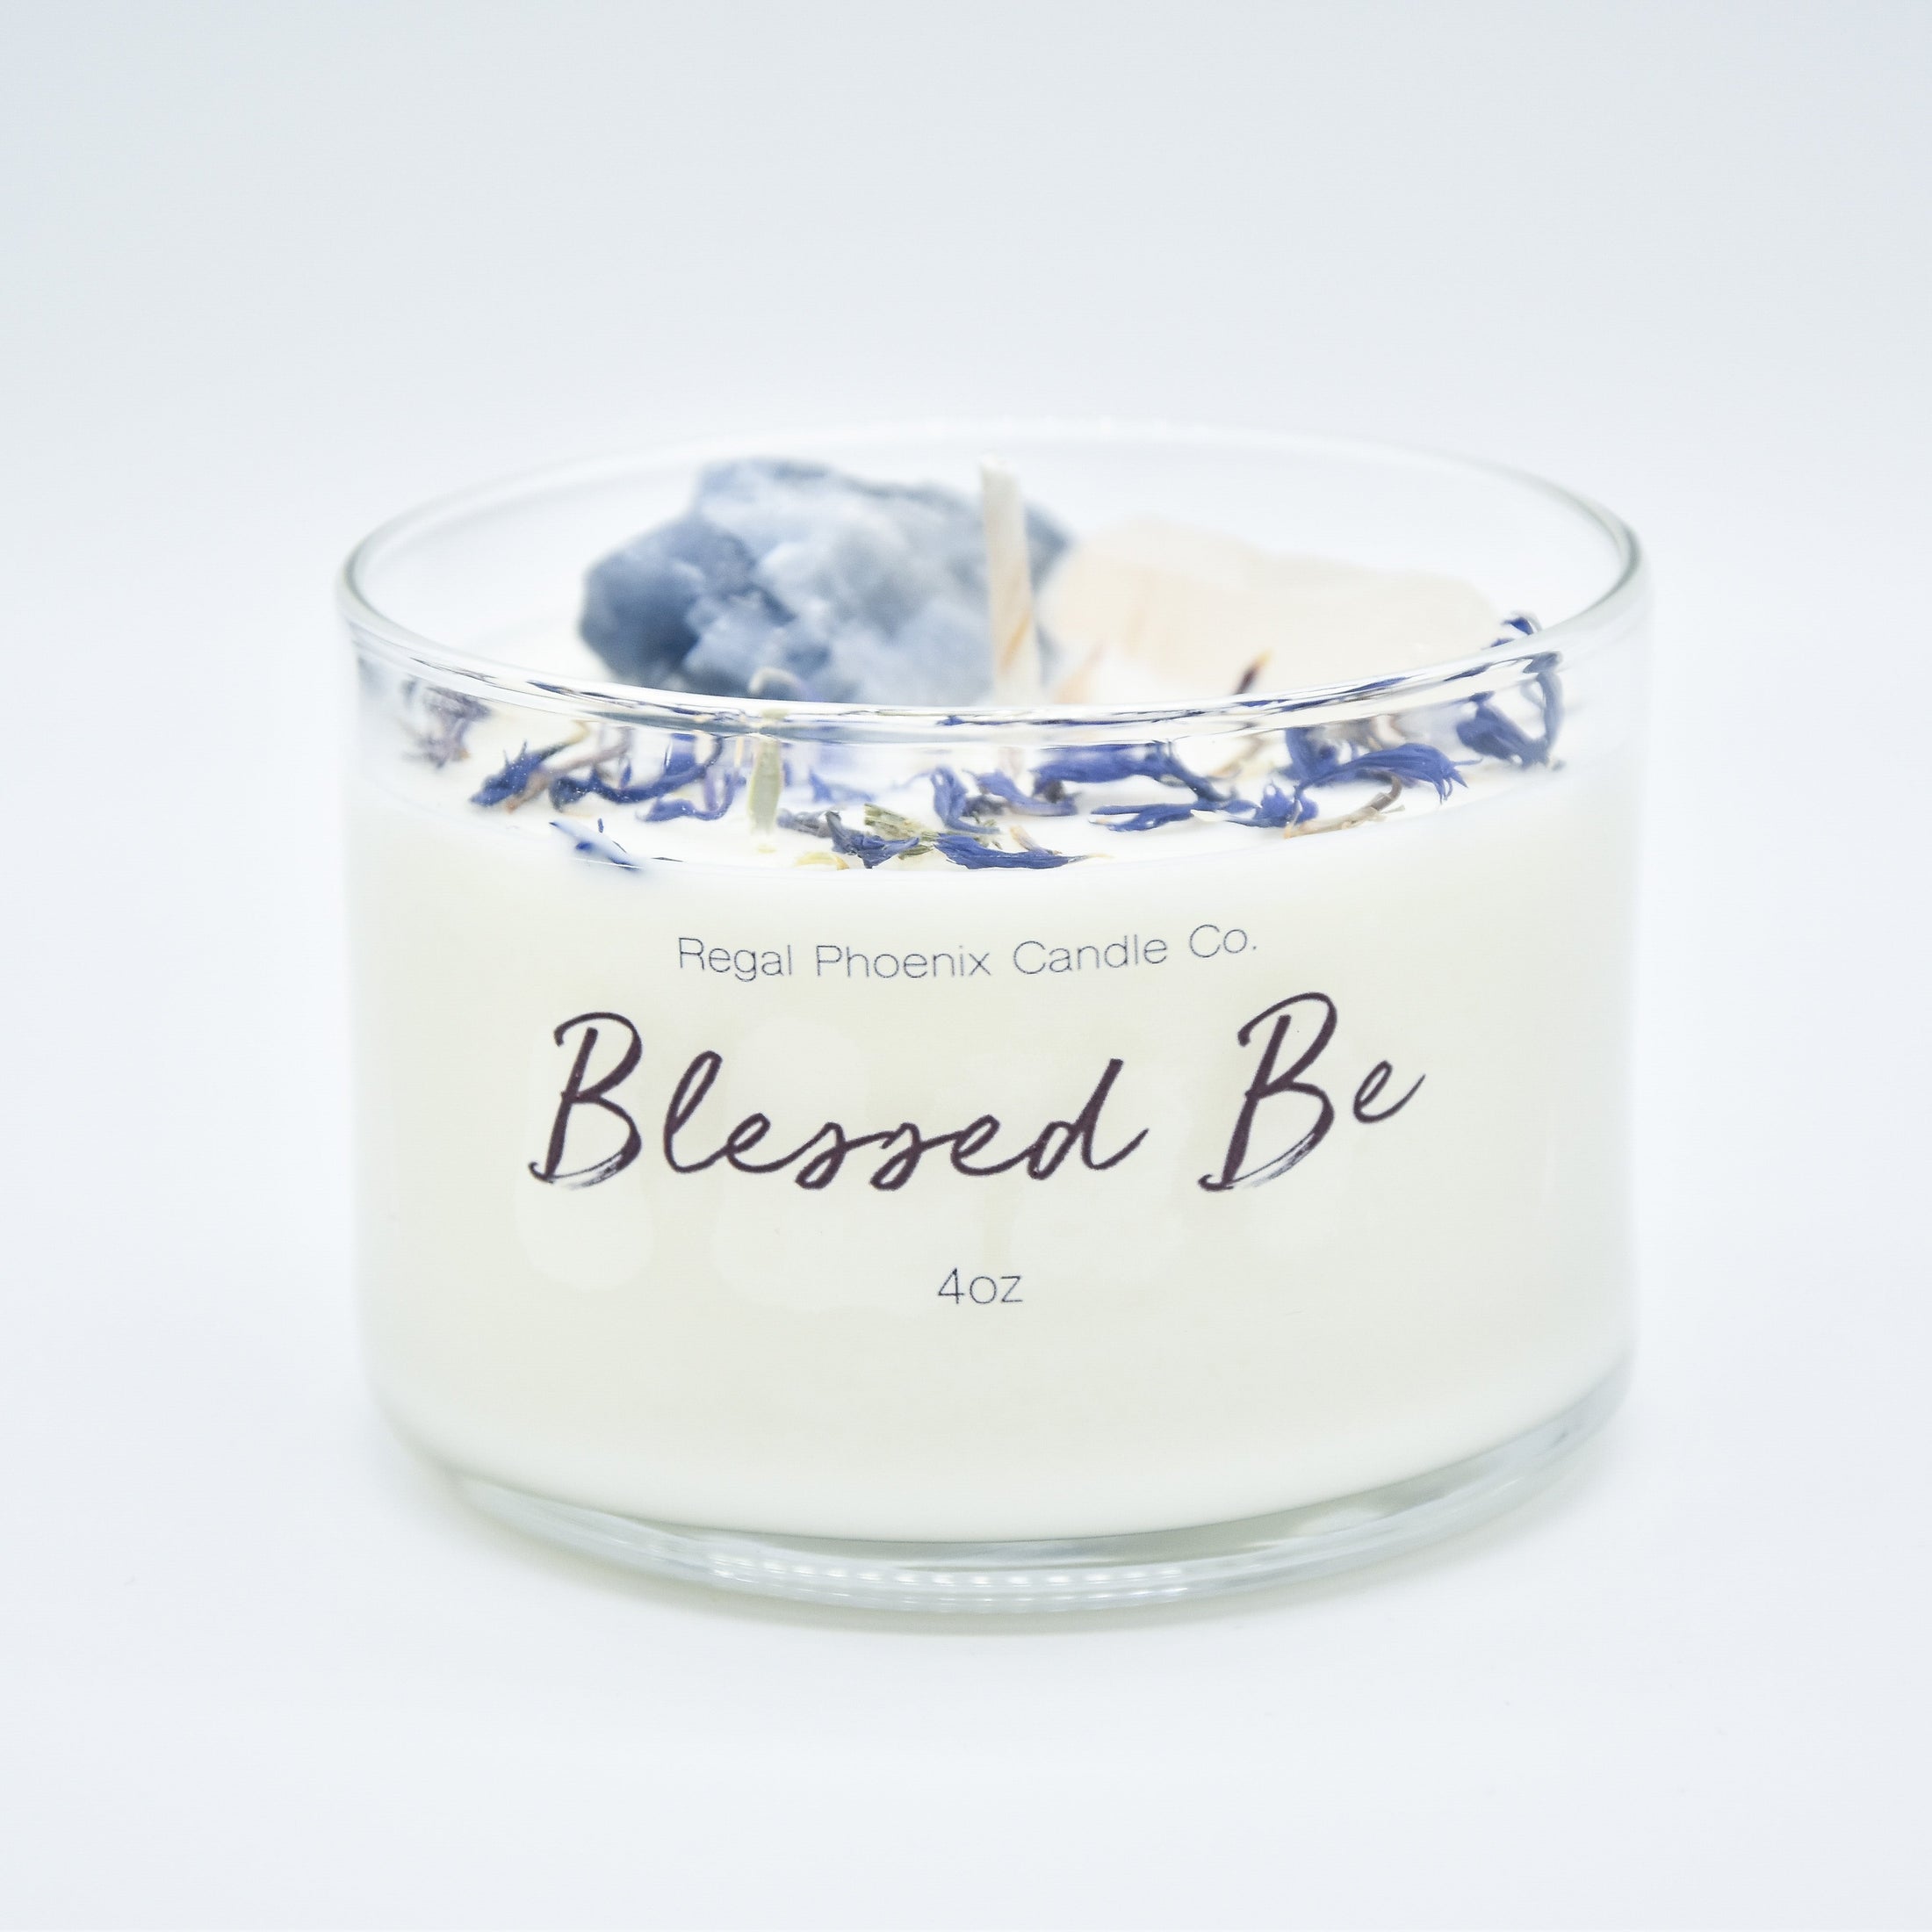 "Blessed Be" Crystal Infused Soy Candle